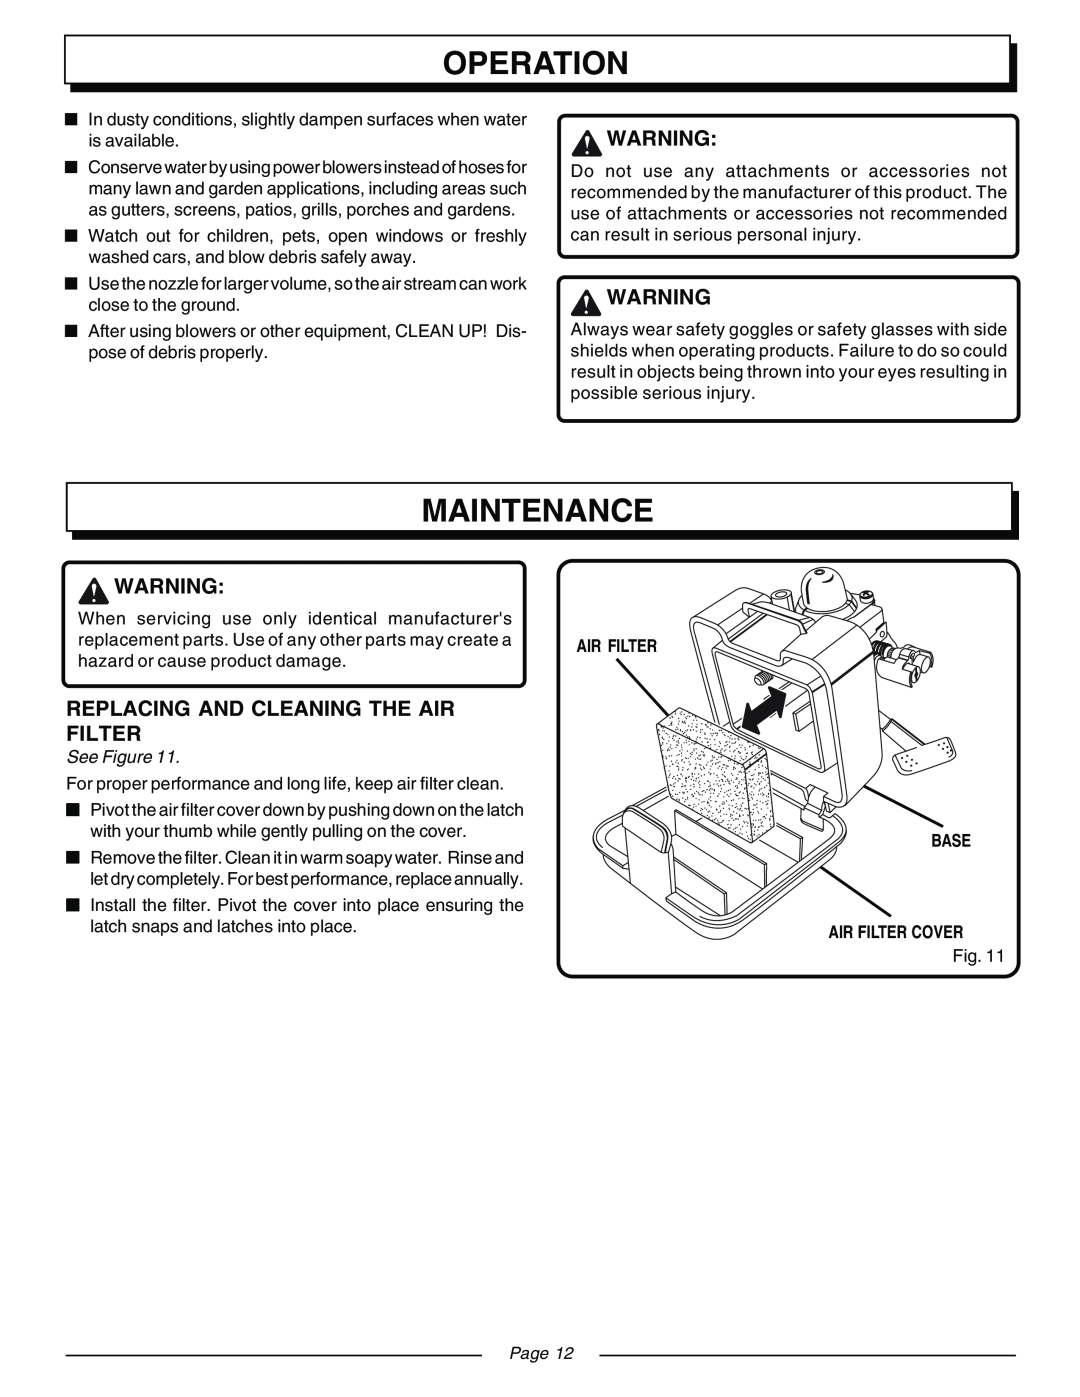 Homelite UT08571, UT08570 manual Maintenance, Operation, See Figure, Base Air Filter Cover, Page 